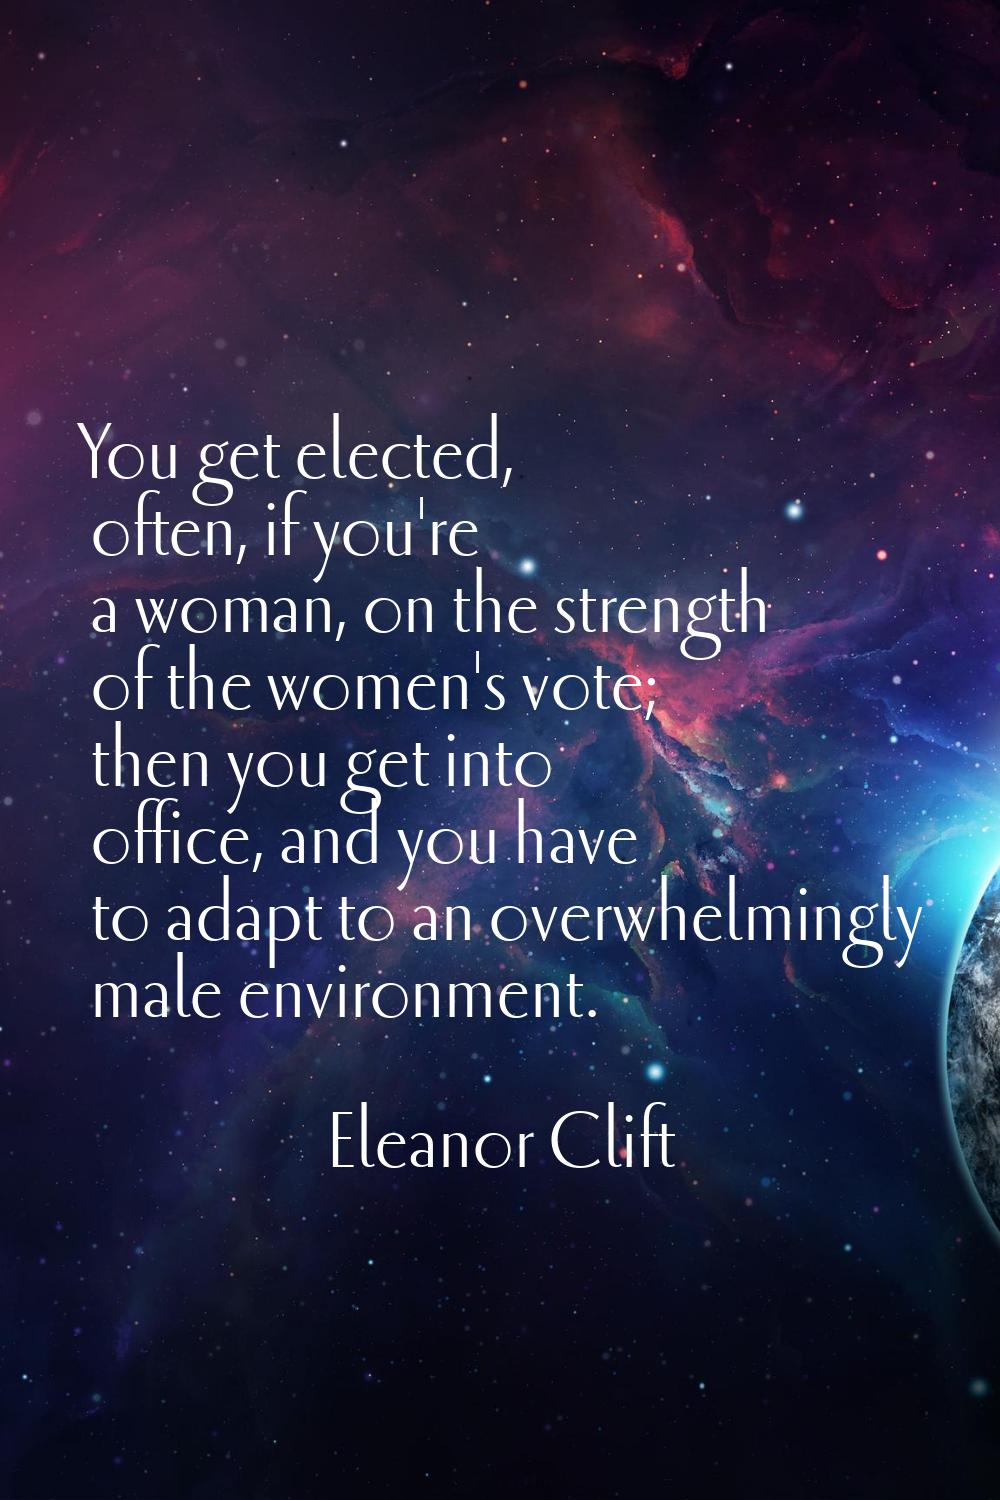 You get elected, often, if you're a woman, on the strength of the women's vote; then you get into o